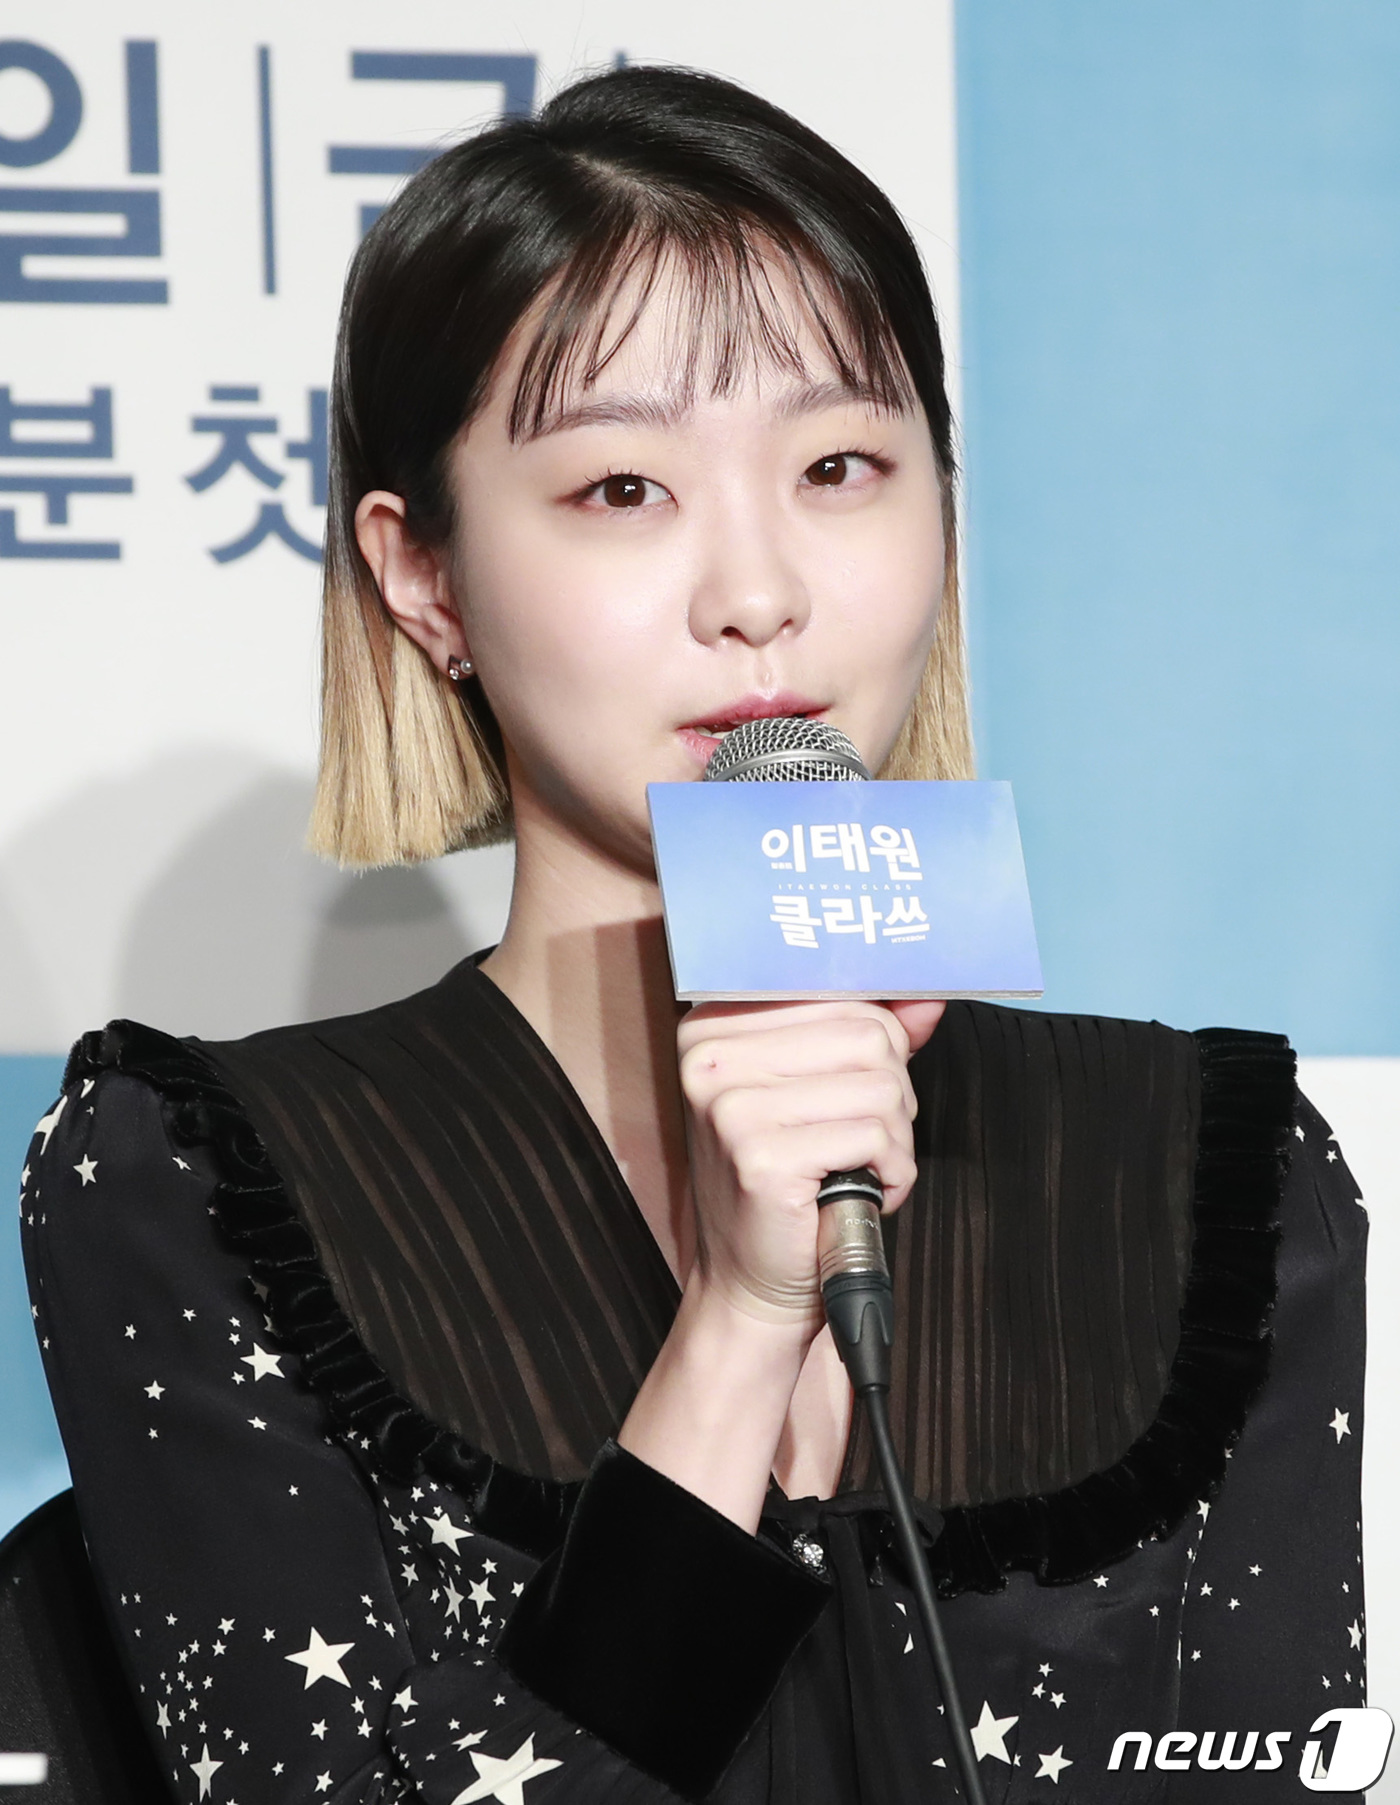 On the afternoon of the 30th, a production presentation of JTBC Itaewon Klath (playplayplay by Jo Kwang-jin/directed by Kim Seong-yoon) was held at the Conrad Seoul Hotel in Yeongdeungpo-gu, Seoul.Actor Park Seo-joon Kim Da-mi Yoo Jae-myung Kwon Nara, Kim Seong-yoon PD and Jo Kwang-jin writer attended the ceremony.Itaewon Clath is a drama based on the next webtoon of the same name. It is a work that depicts the hip rebellion of youths who are united in unreasonable world, stubbornness and guest.The myth of the start-up of those who pursue freedom with their own values ​​will be dynamically unfolded in the small streets of Itaewon, which seems to have compressed the world.Park Seo-joon endured all kinds of hardships and played Park Sae-roi, who opened Sanbam Foa in Itaewon with money for seven years.Kim Da-mi gave up his admission to prestigious universities and played Joe-yool Lee, who is a manager of Danbam, and Kwon Nara is the head of the strategic planning team of Janga and the role of SuA, which regards himself as the most precious and precious.Yoo Jae-myung plays Jang Dae-hee, the chairman of Janga and blocking the front of Park Sae-roi.Kim Seong-yoon PD said, Itaewon Clath is the first drama of the filmmaker Showbox. It seems that there is freshness that the union gives, he said. The writer is also the first author to write the drama, I am the first drama in JTBC, and the first drama to produce the showbox.Showbox is now doing well in the movie Namsans Managers, and I hope that the atmosphere will continue well (to Itaewon Clath).Jo Kwang-jin, who has been writing the original webtoon and the drama drama, talked about the difficulty of the drama writing process.Cho said, It was the opportunity for me to participate that no one had ever written a drama, he said. I thought it was easy to write because I was a cartoonist who was doing all the writing, but I felt it was difficult to write.In the meantime, Cho said, But I met a very good person, he said. I thought it was my master and I got a lot of help.Park Seo-joon said of Itaewon Clath that Drama itself does not have a story that is far from the original because there is a famous original work in so far.It seems that a little more interesting story will be broadcast with the addition of it.Park Seo-joon said, I was attracted to this drama because I felt the charm of Remady in the role to express it. I also took a lot of effort to express such a delicate part.Kim Da-mi said, I read it in three hours as soon as I saw the webtoon, he said. It was so fun and interesting.I felt that the character called Joe-yool Lee was a character I had not seen before, so I thought it would be fun to act, he said. When I met the director, I joined him because he suggested that I could make my own Joe-yol Lee.Kwon Nara talked about the effort she put in while playing SuA in the play.Kwon Nara said, In the original work, there was not much remady of SuA. But Remady is well melted in Drama.I am trying to express the newness of my childhood, the youthful youth, and the inevitable difficulties of my childhood. Yoo Jae-myung said, I think that every time I do a work, I do not think it is a villain, but I act. I always have a reason and a conviction, and I thought that one side of his own curved life history was the present, He said.I think I am not, but I saw a lot of old-fashioned people, said Yoo Jae-myung, who was a top model for the elderly. So I personally was a big top model.I tried to play it naturally, not just imitating it while making special makeup. Yoo Jae-myung explained, I have a lot of skin damage because I am making a special makeup, but I think that when I finish this work, I will get a lot of wrinkles.Jo Kwang-jins confidence in these actors is also high.Its 120%, Cho said, referring to the synchro rate of the original and the actors. From a certain moment, the actors interpret and implement the characters, and they cried.Im so happy, he said.He also made a commitment to ratings.Park Seo-joon said, If the audience rating exceeds double digits, we are running Foa called Sweet Night in the play, so I would like to suggest that we should try it as an event. I hope you have time to actually spend with viewers.If it becomes a double digit, I would like to meet with viewers at Foa. Meanwhile, Itaewon Clath will be broadcasted at 10:50 pm on the 31st.